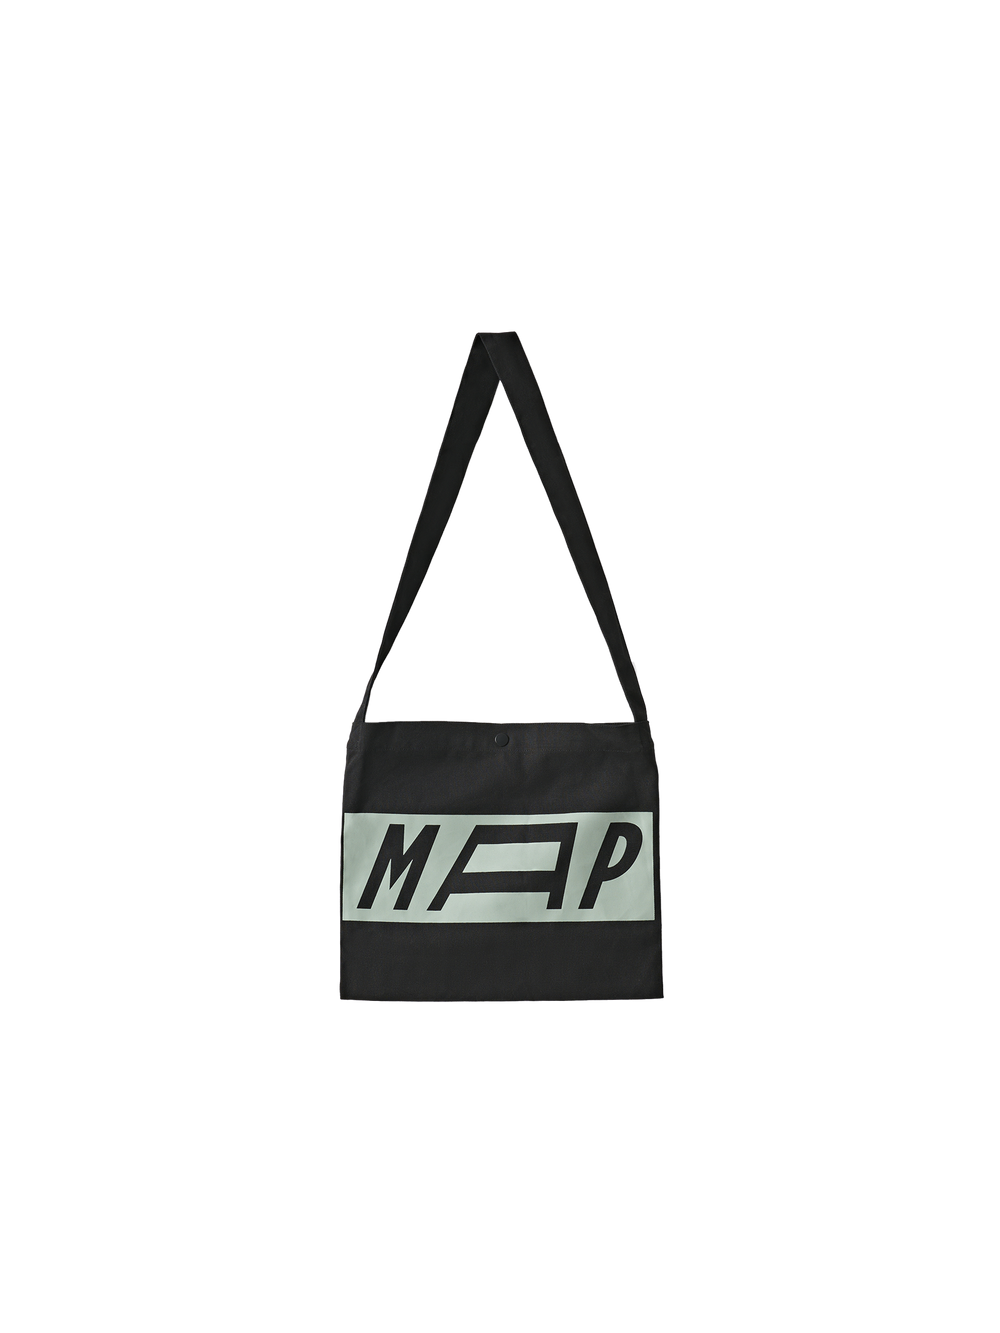 Product Image for Adapt Musette